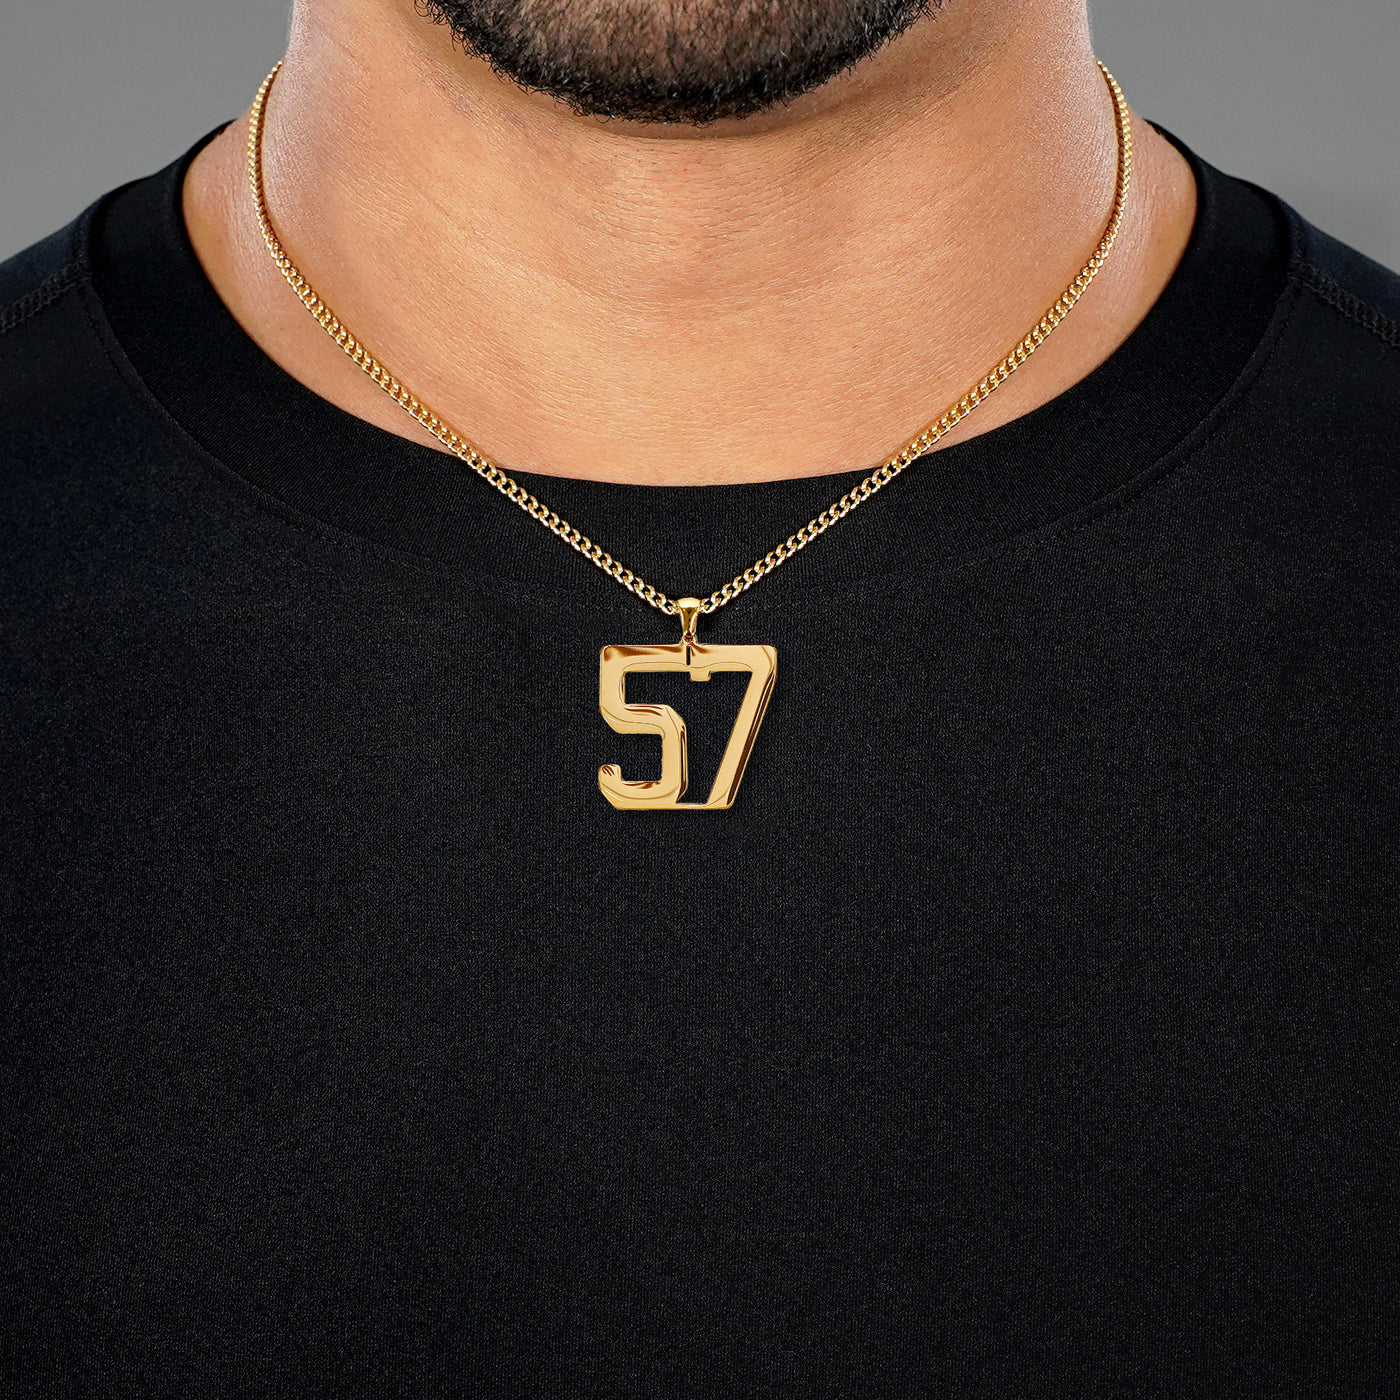 57 Number Pendant with Chain Necklace - Gold Plated Stainless Steel